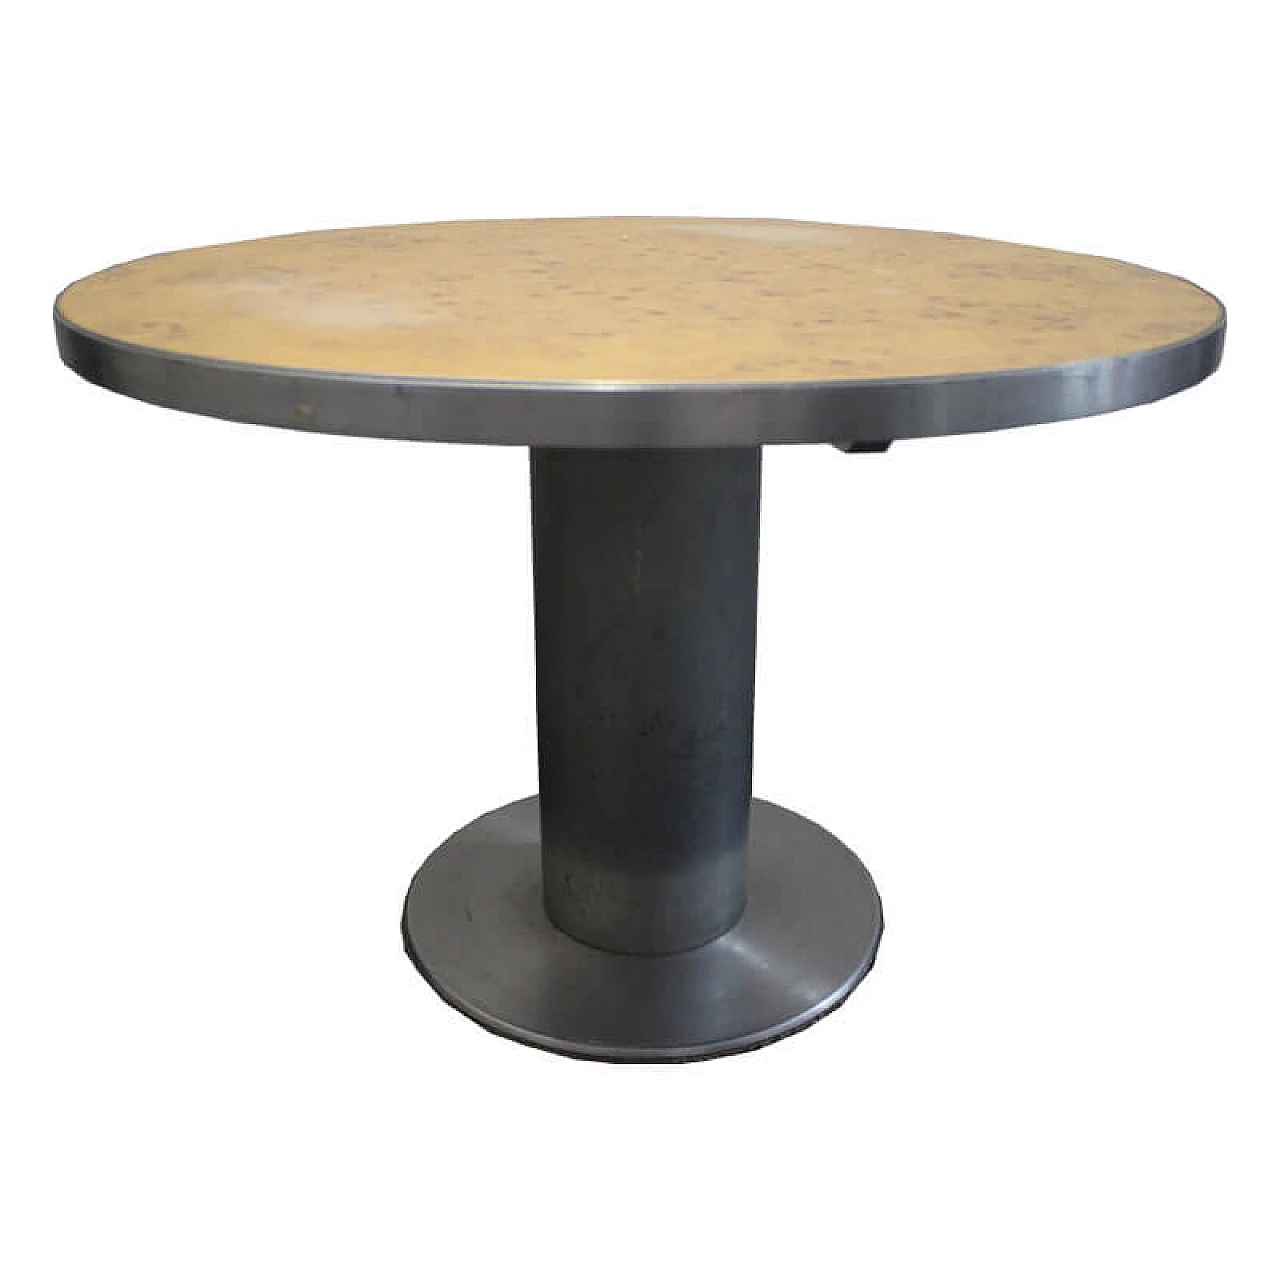 Steel dining table with tuja briar top, Willy Rizzo 1078162